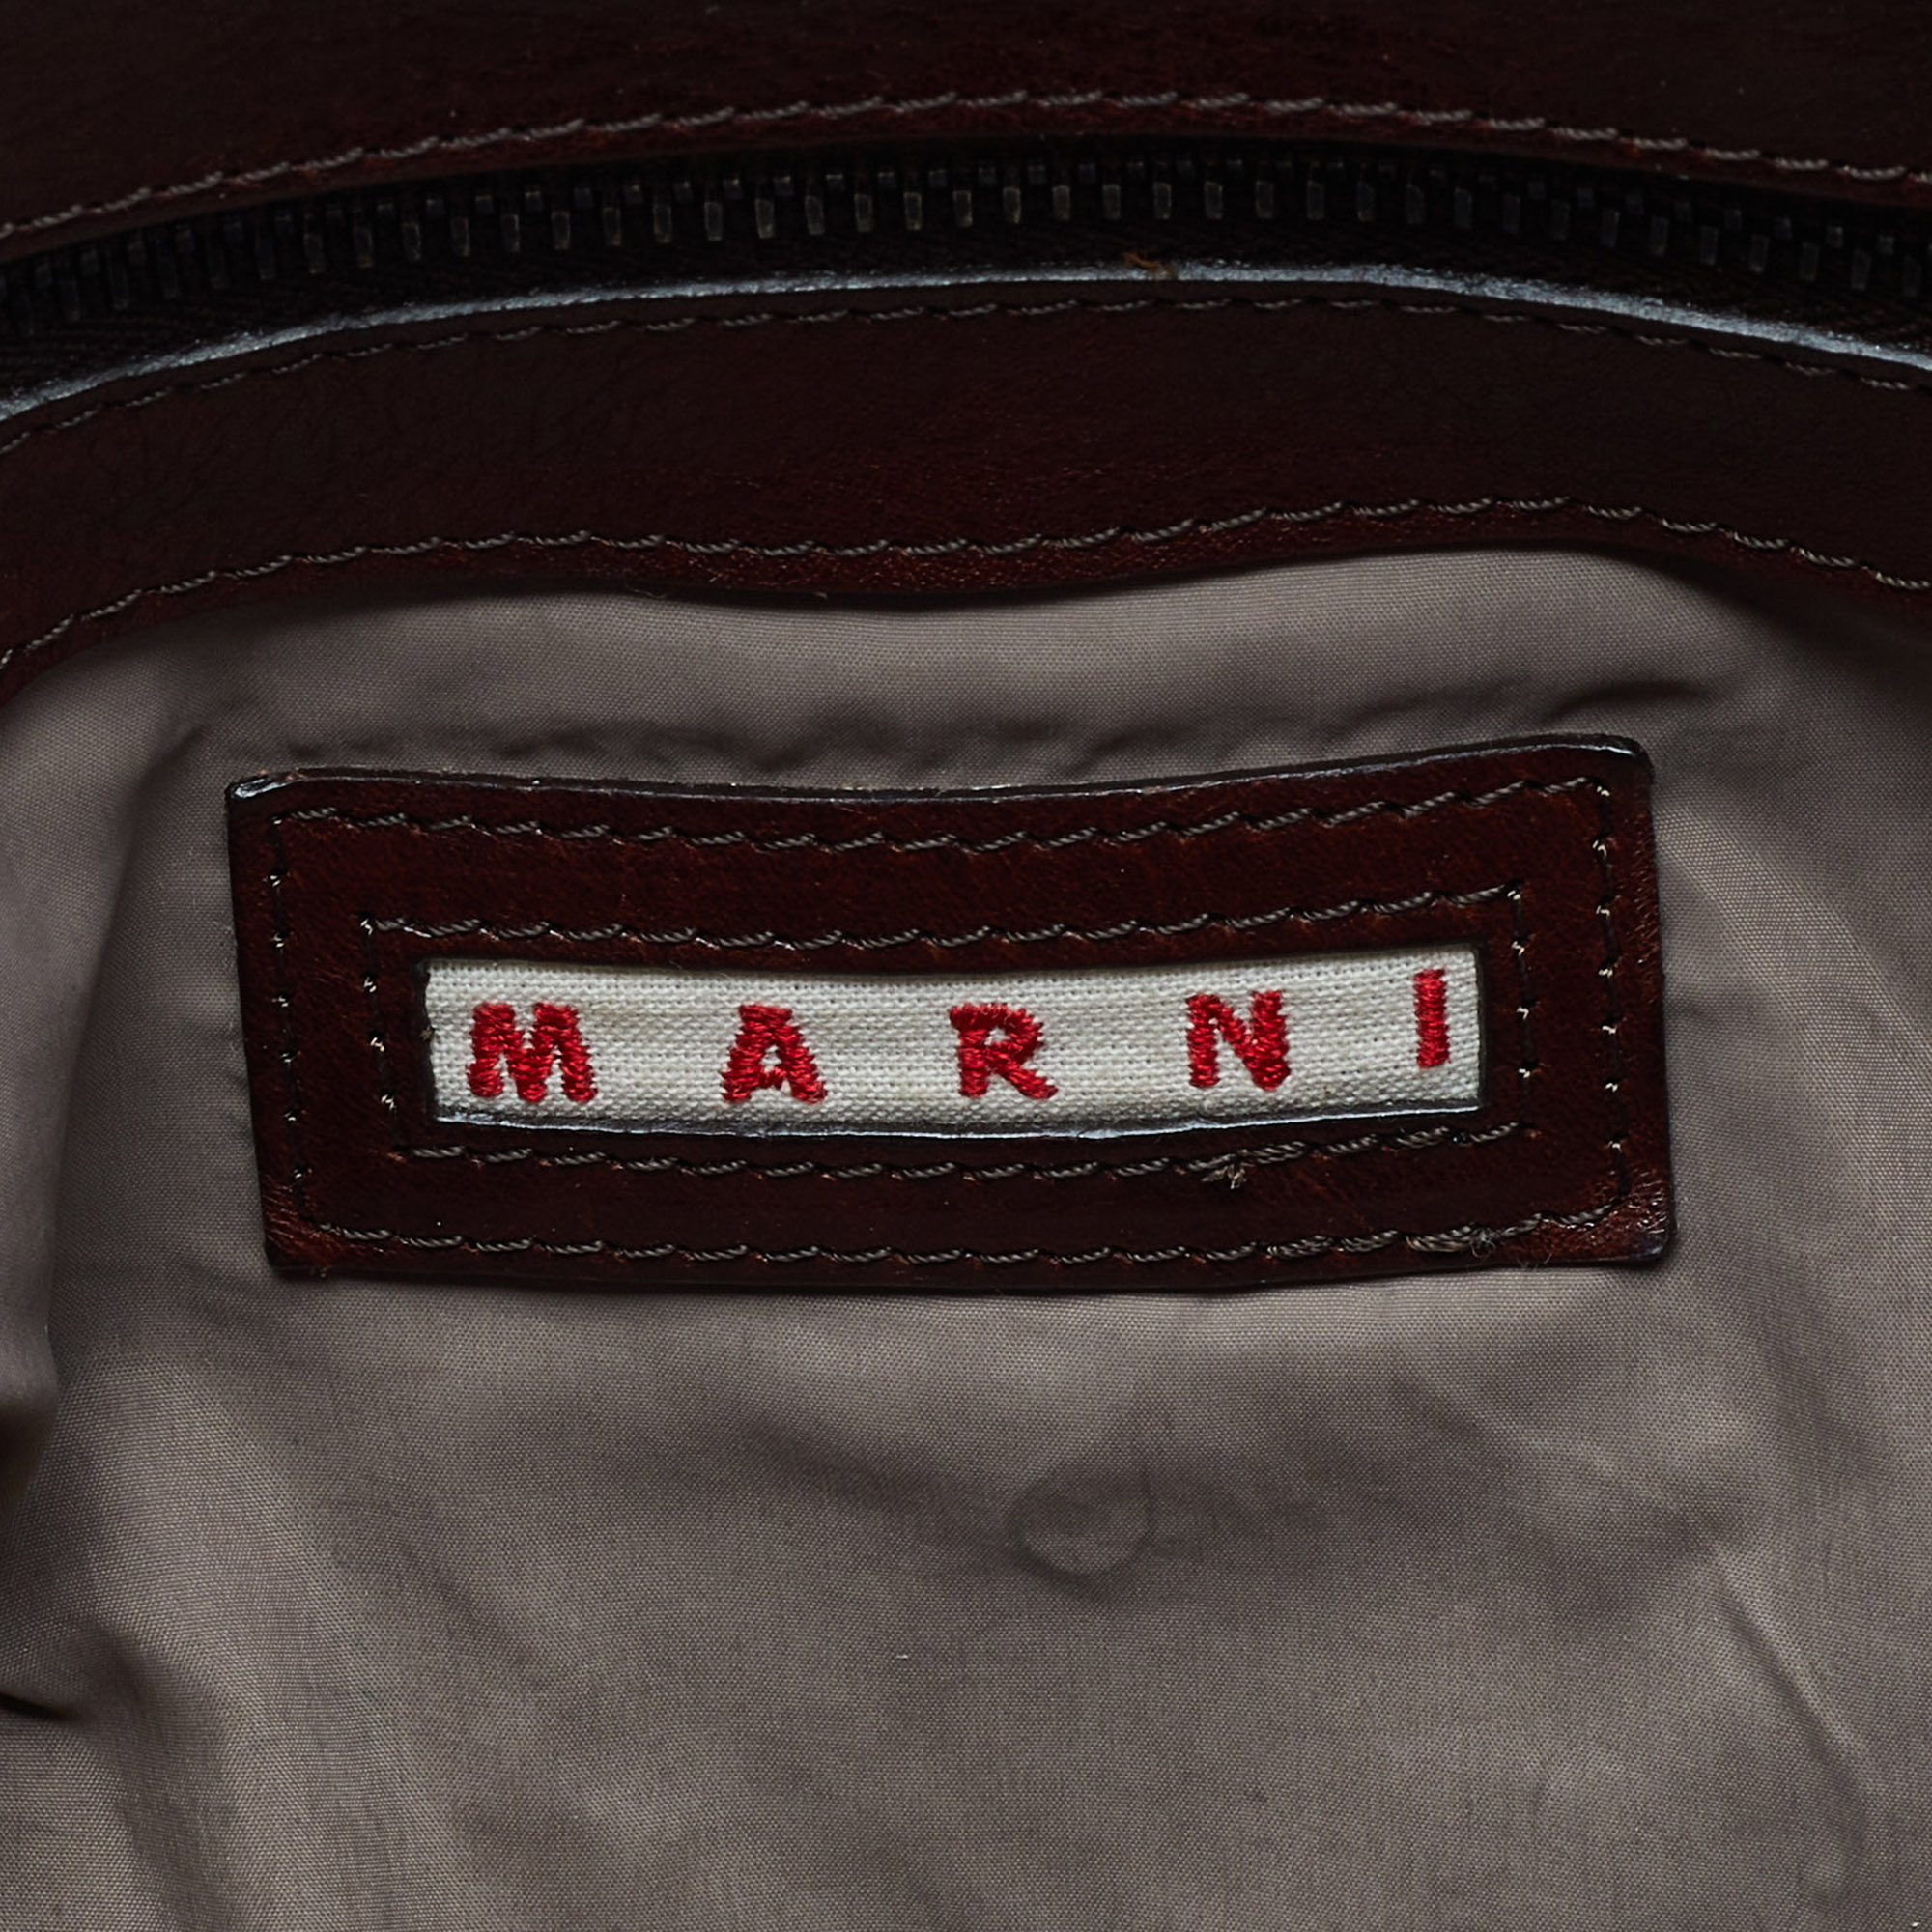 Marni Black/Brown Patent And Leather Tote